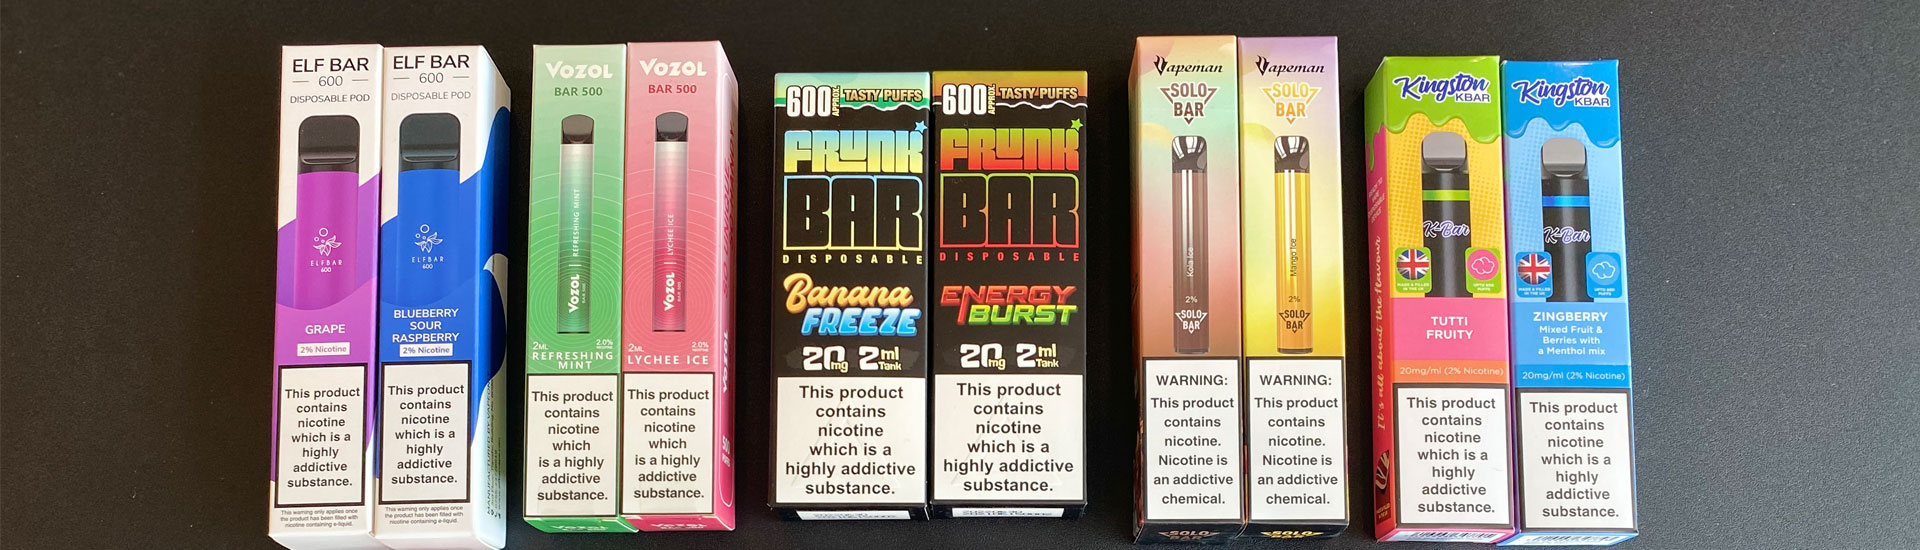 disposable-vapes-banner-1